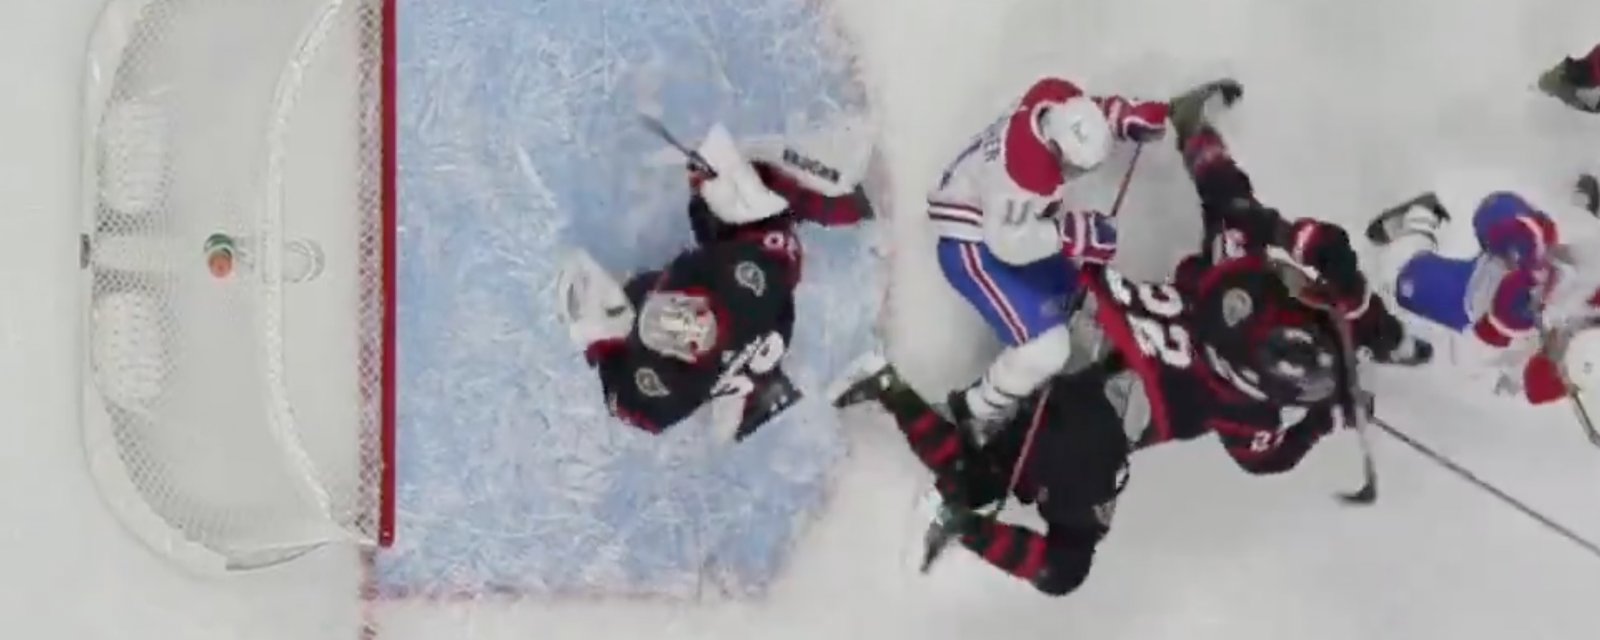 NHL under heavy fire after most controversial call of the season yet